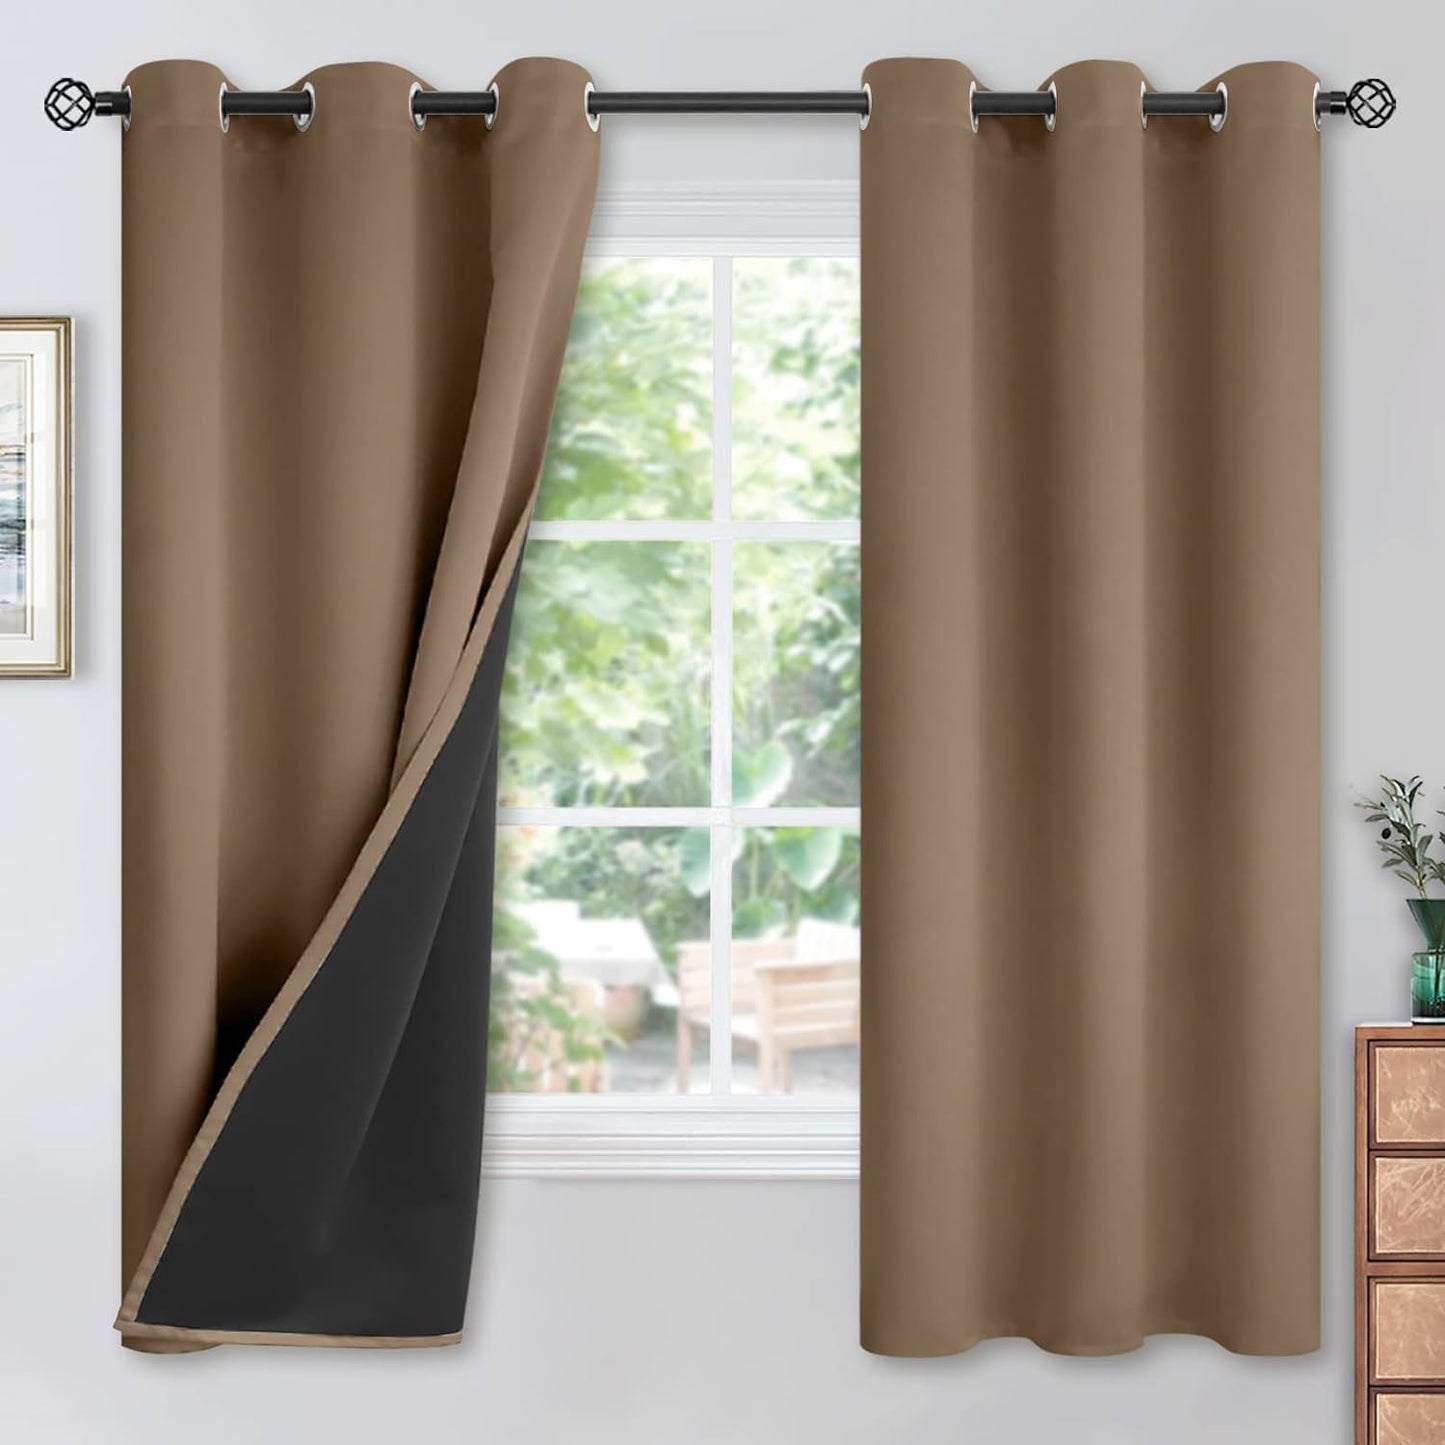 Youngstex Black 100% Blackout Curtains 63 Inches for Bedroom Thermal Insulated Total Room Darkening Curtains for Living Room Window with Black Back Grommet, 2 Panels, 42 X 63 Inch  YoungsTex Taupe 42W X 63L 